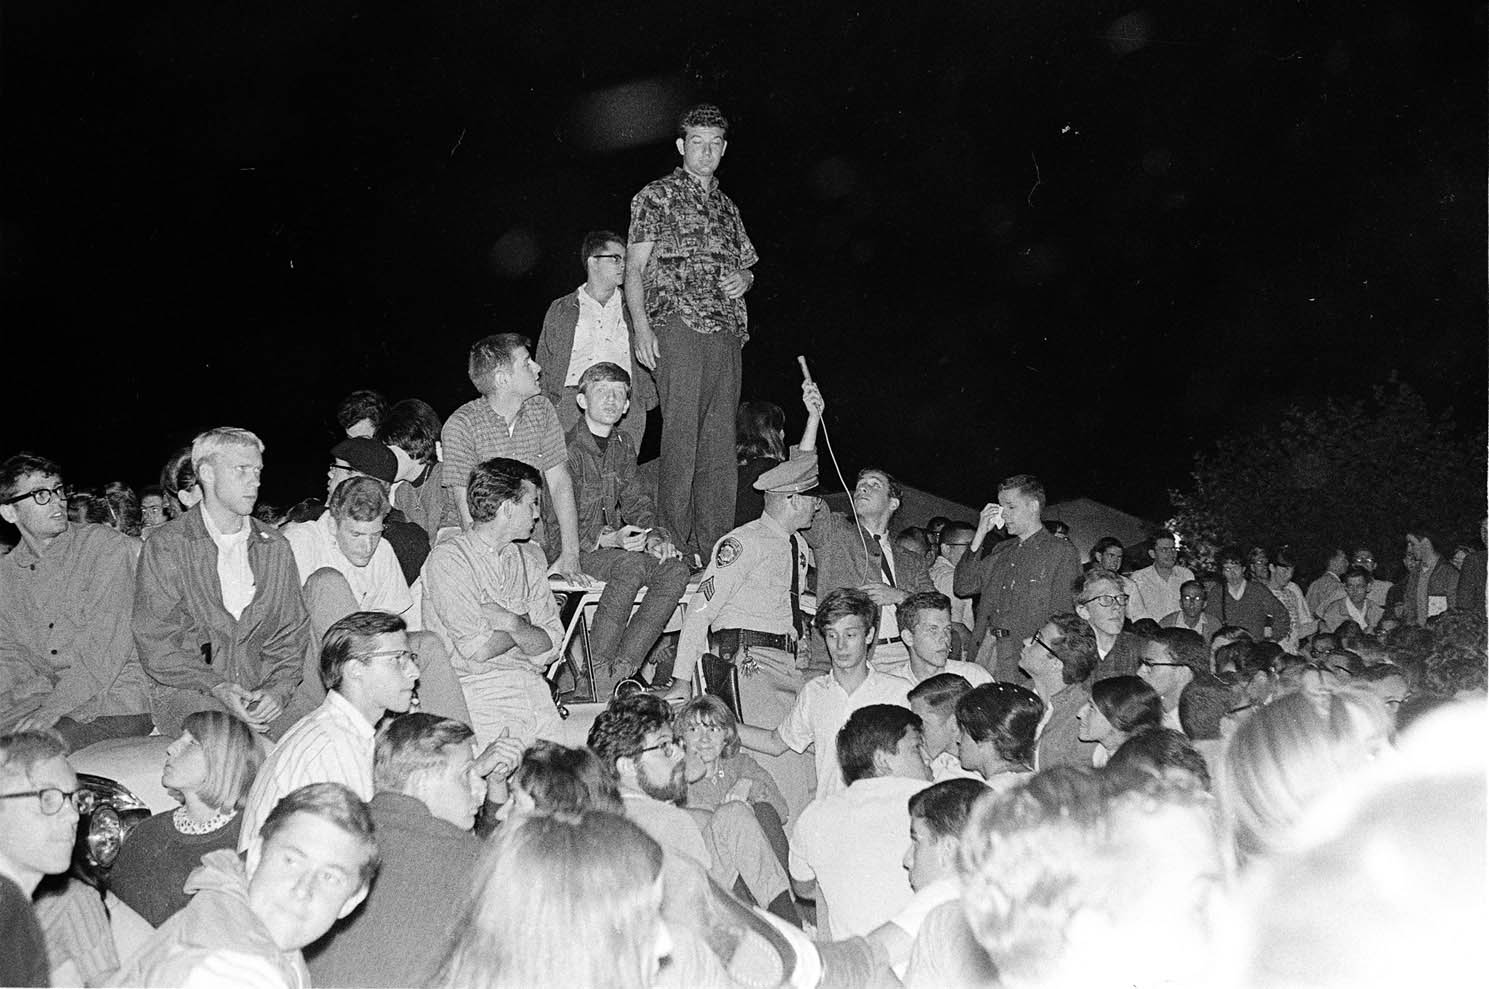 Steven Marcus, Art Goldberg and other students surrounding and on top of the police car during night of 10-1-1964